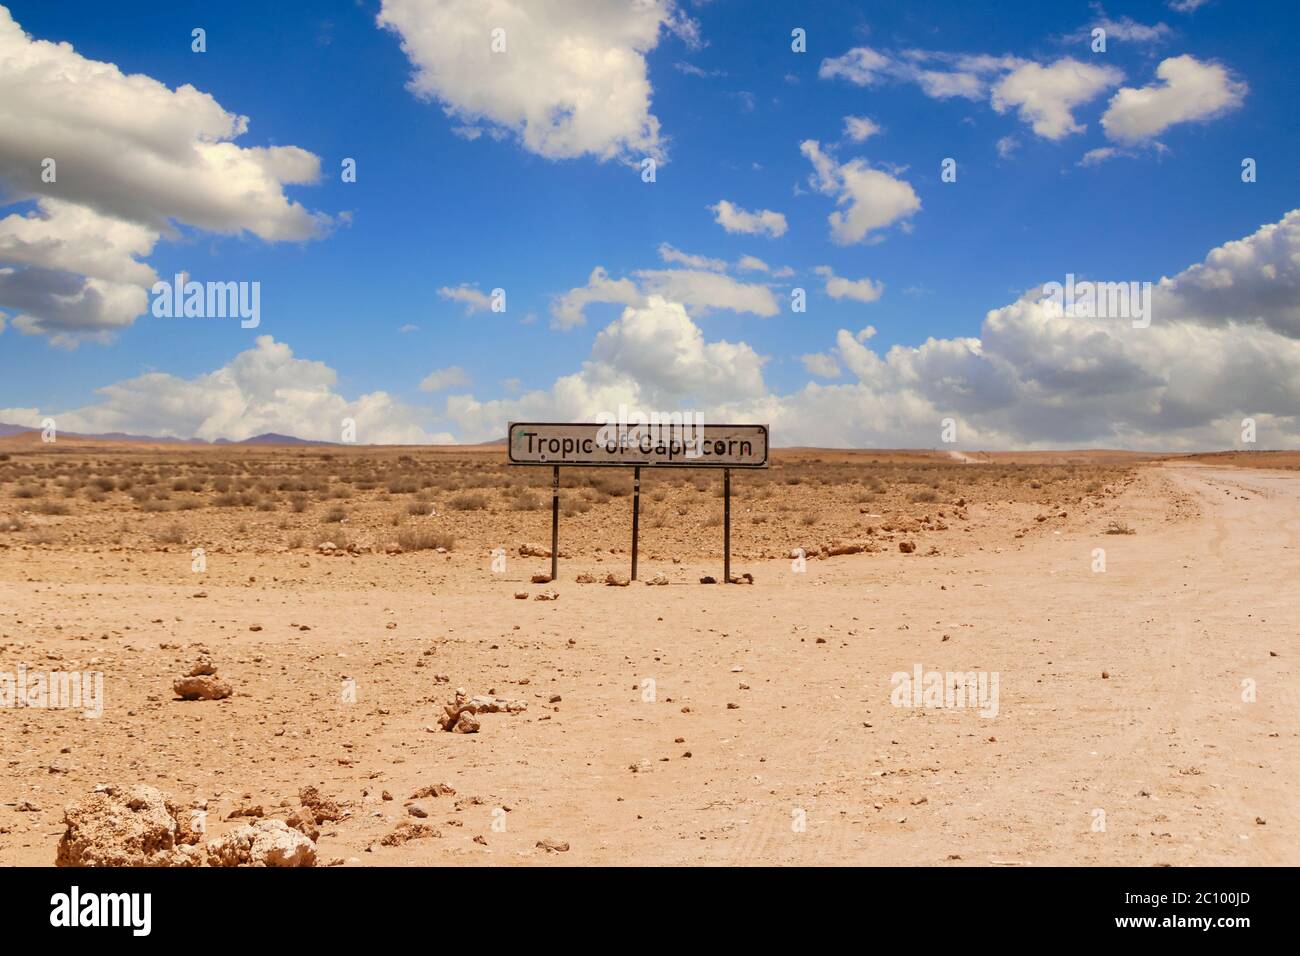 Tropic of Capricorn sign at a desert dirt road in Namibia under a blue sky with some clouds over the sand on a hot day. Stock Photo